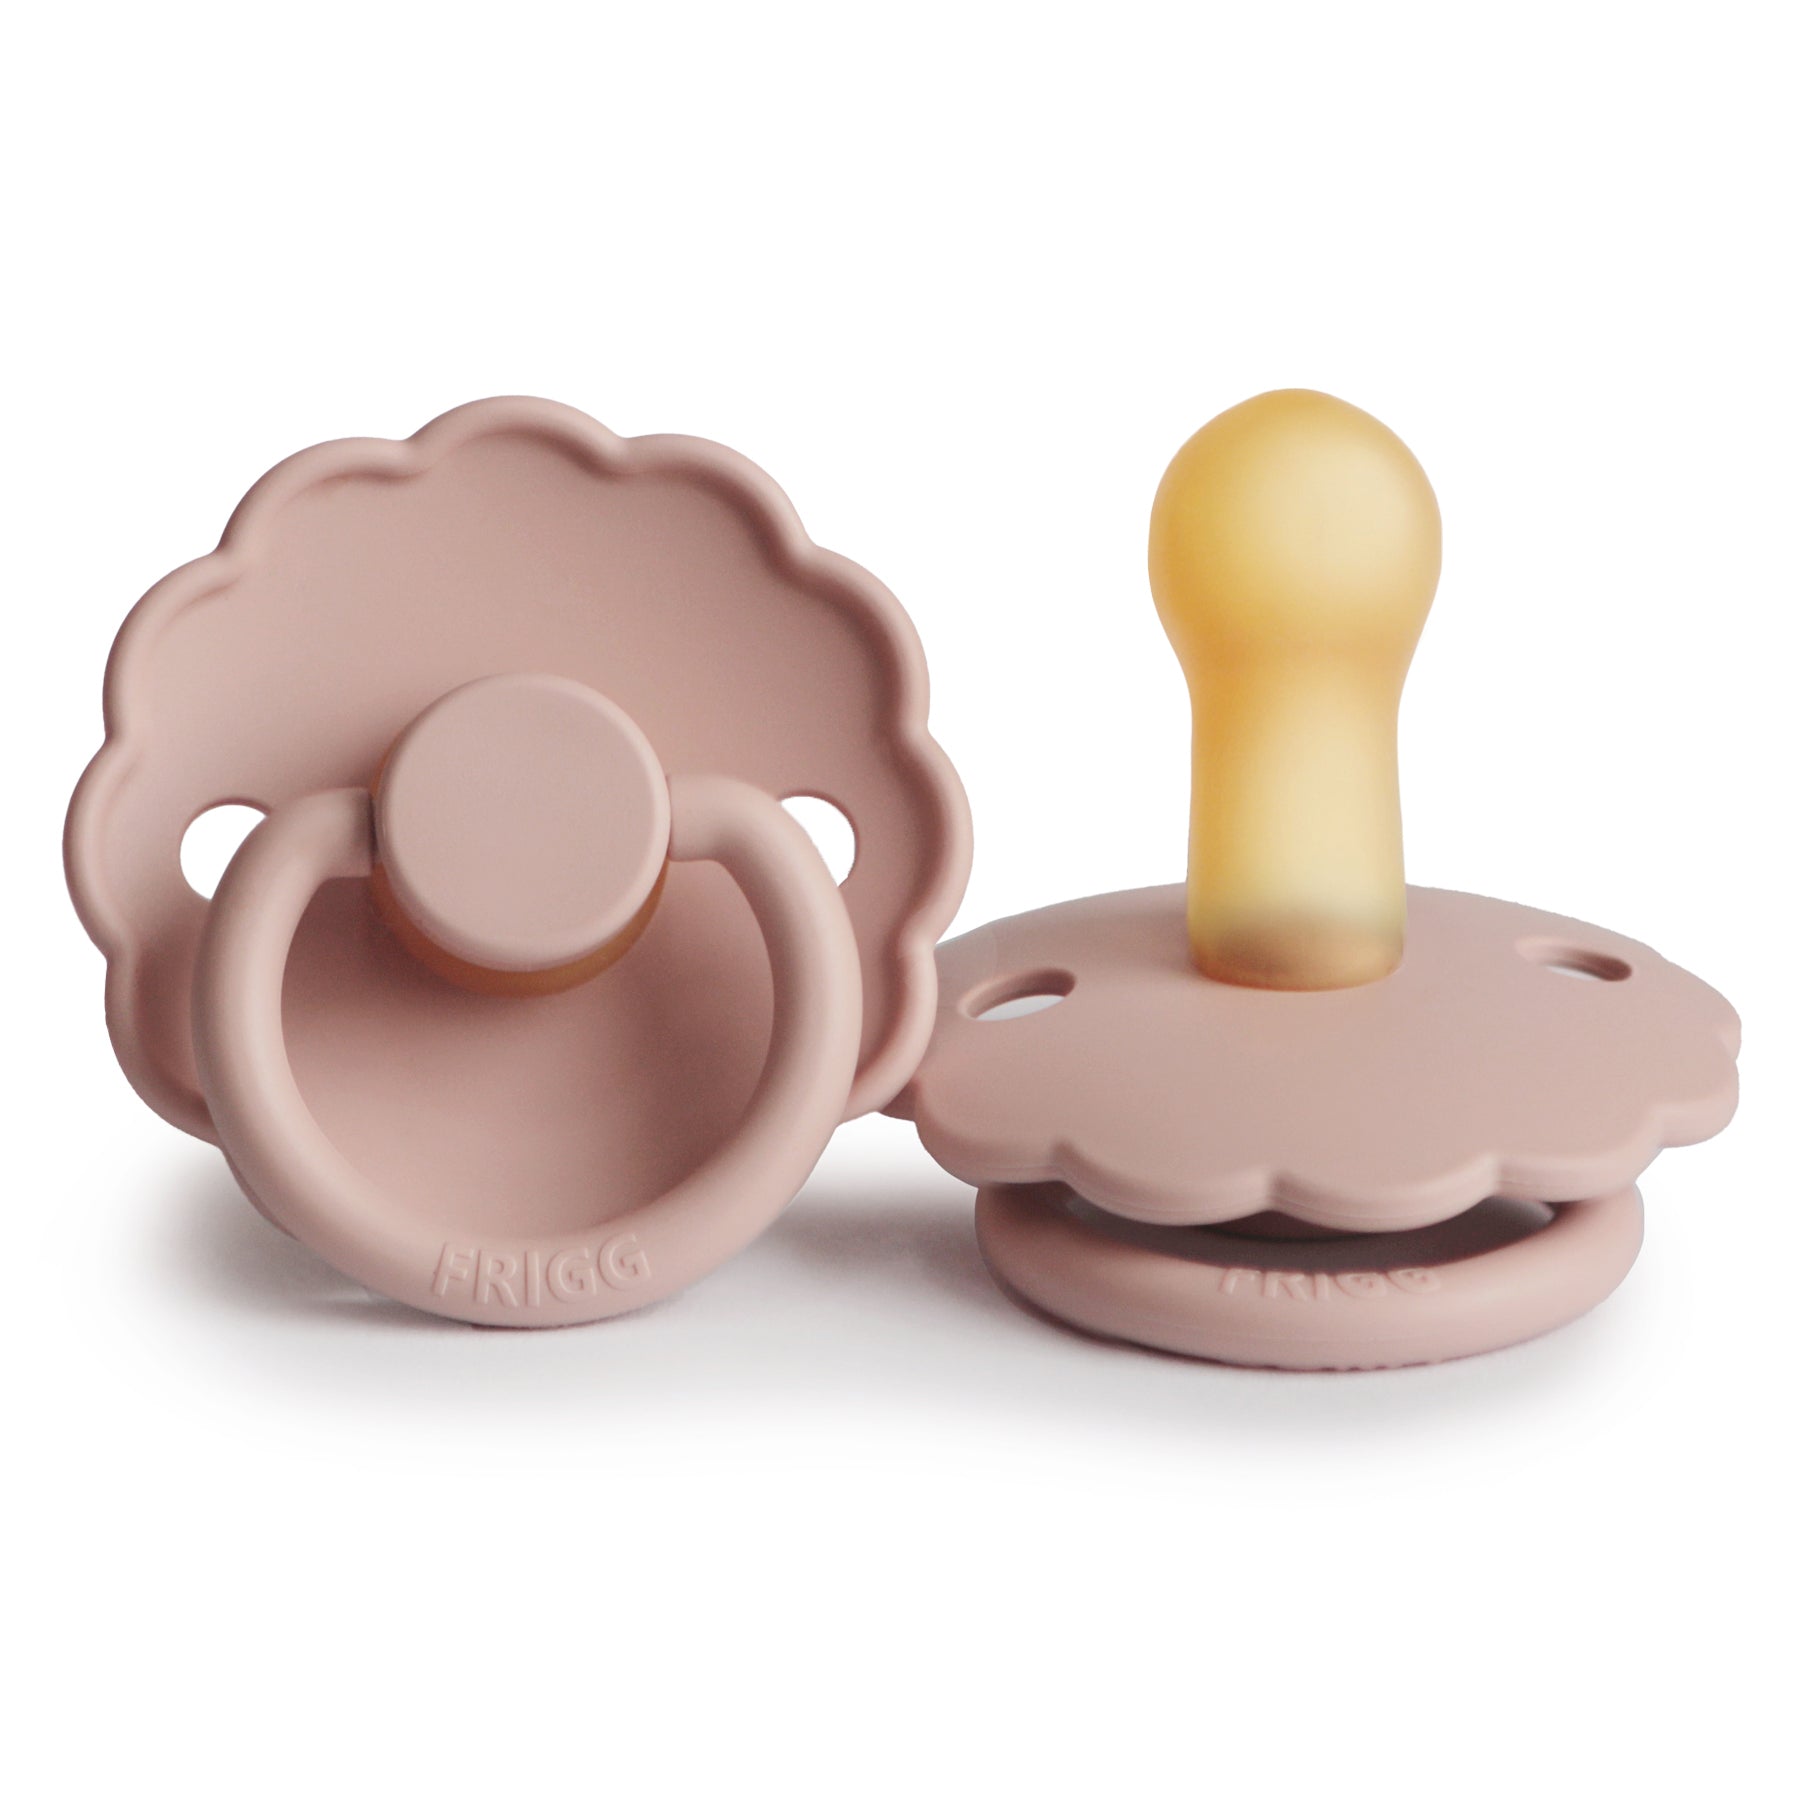 Frigg Daisy Natural Rubber Pacifier - Blush available at Little Mash Boutique